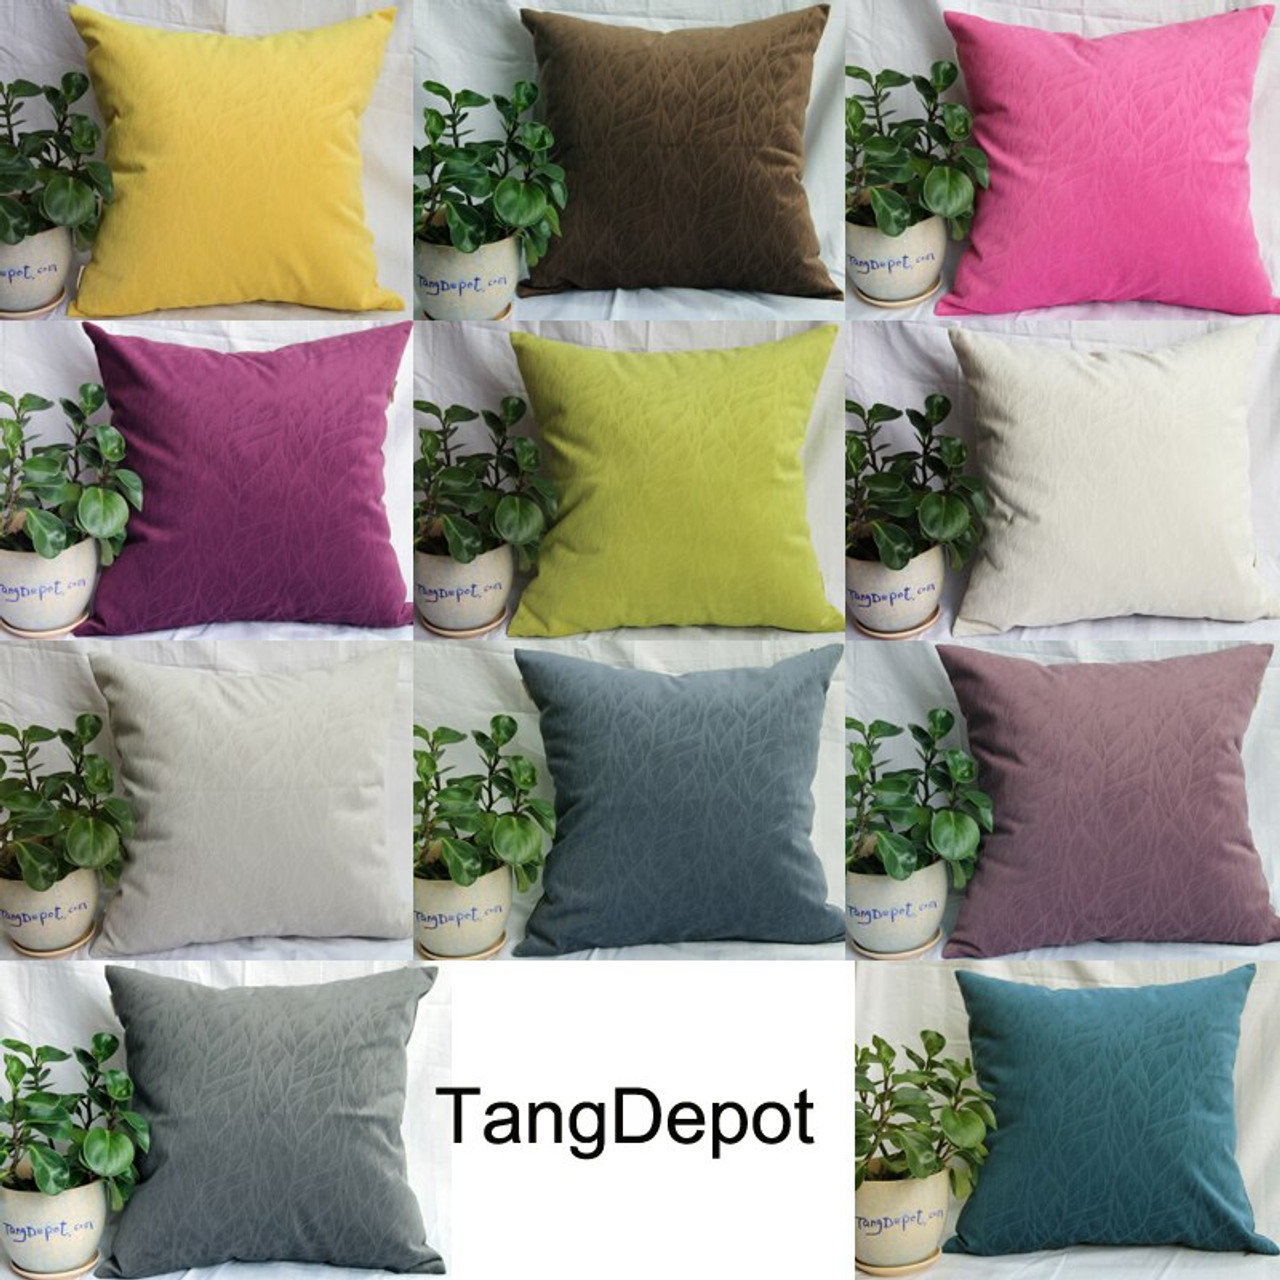 TangDepot Solid Velvet Decorative Pillow Covers/Euro Pillow shams, Super Soft Velour, Micro embossed Leaf texture and shape 